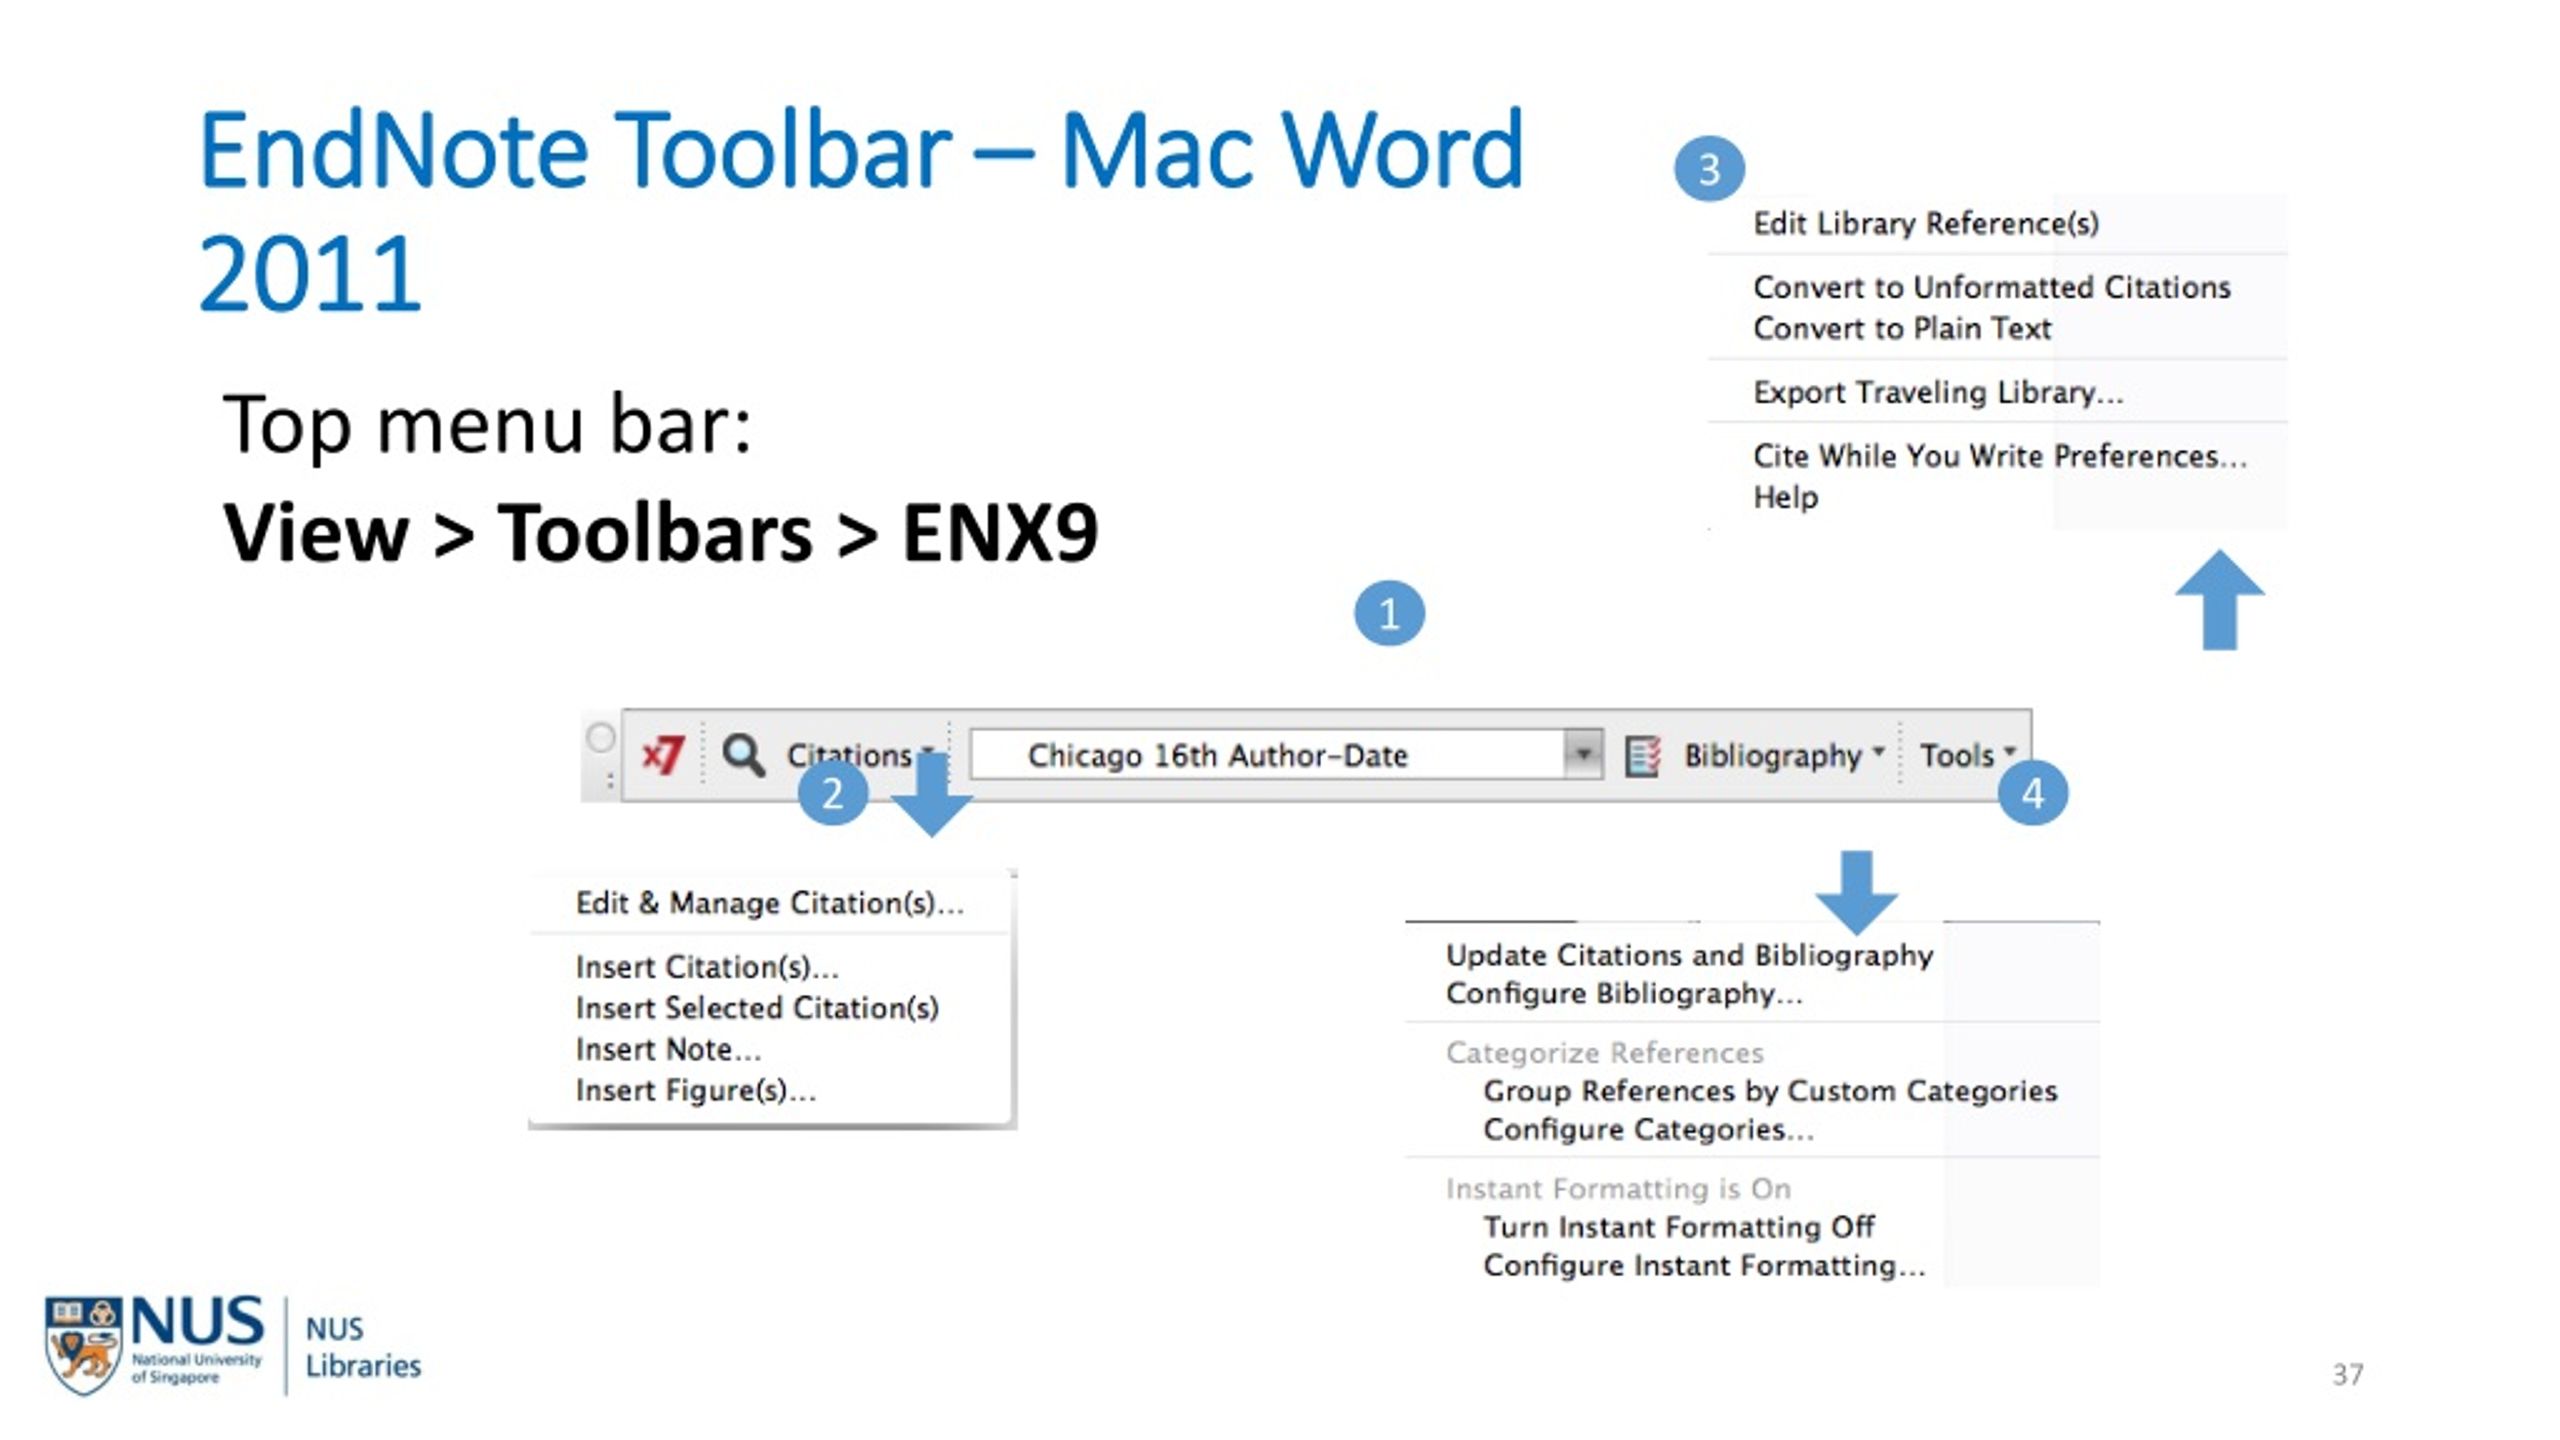 how to show endnote toolbar in word 2011 on mac